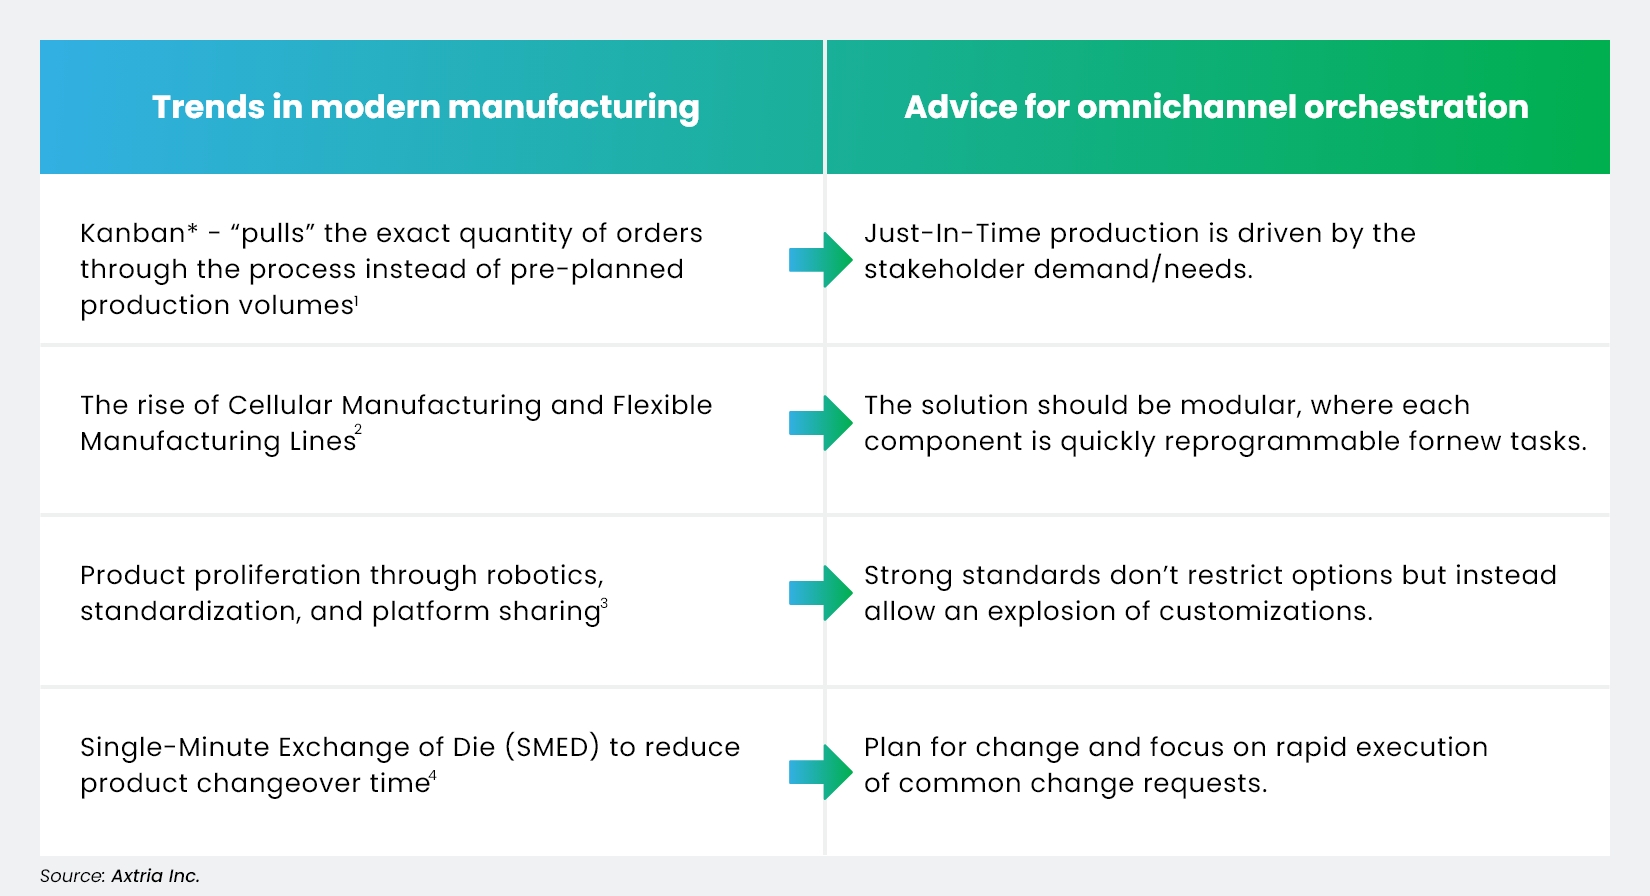 Modern manufacturing provides advice for omnichannel orchestration